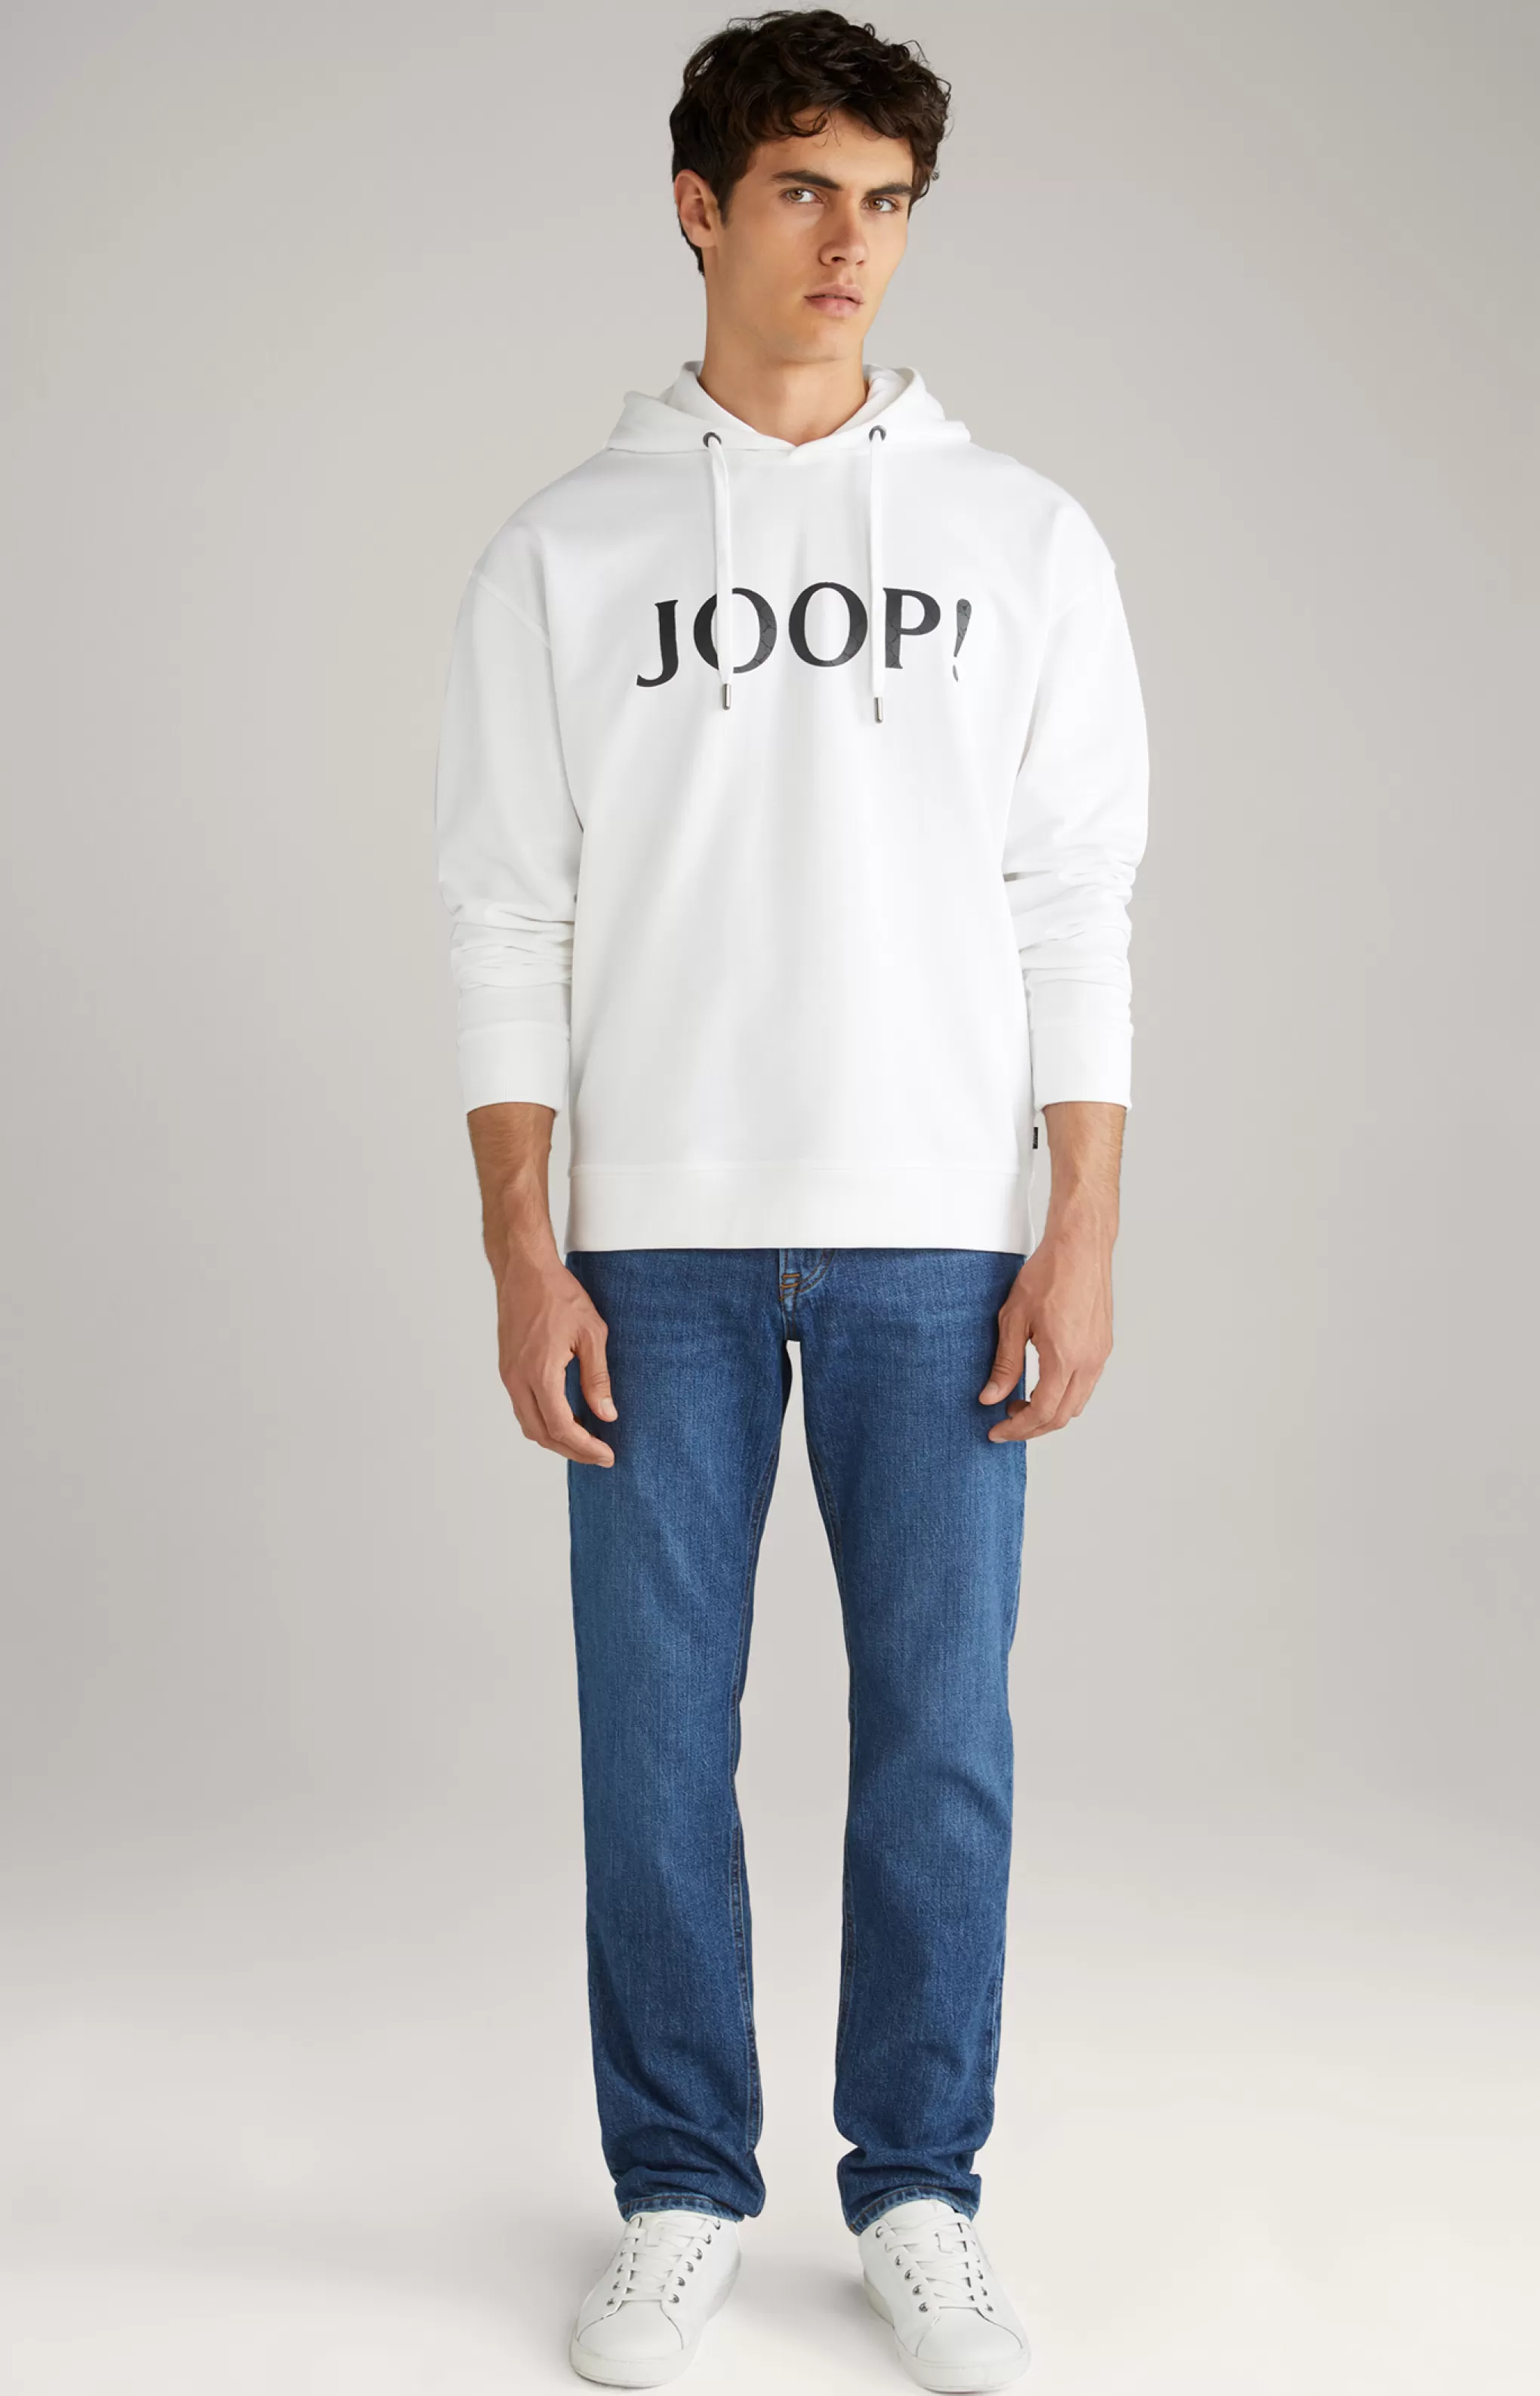 Sweatshirts | Clothing*JOOP Sweatshirts | Clothing Timonos cotton hoodie in